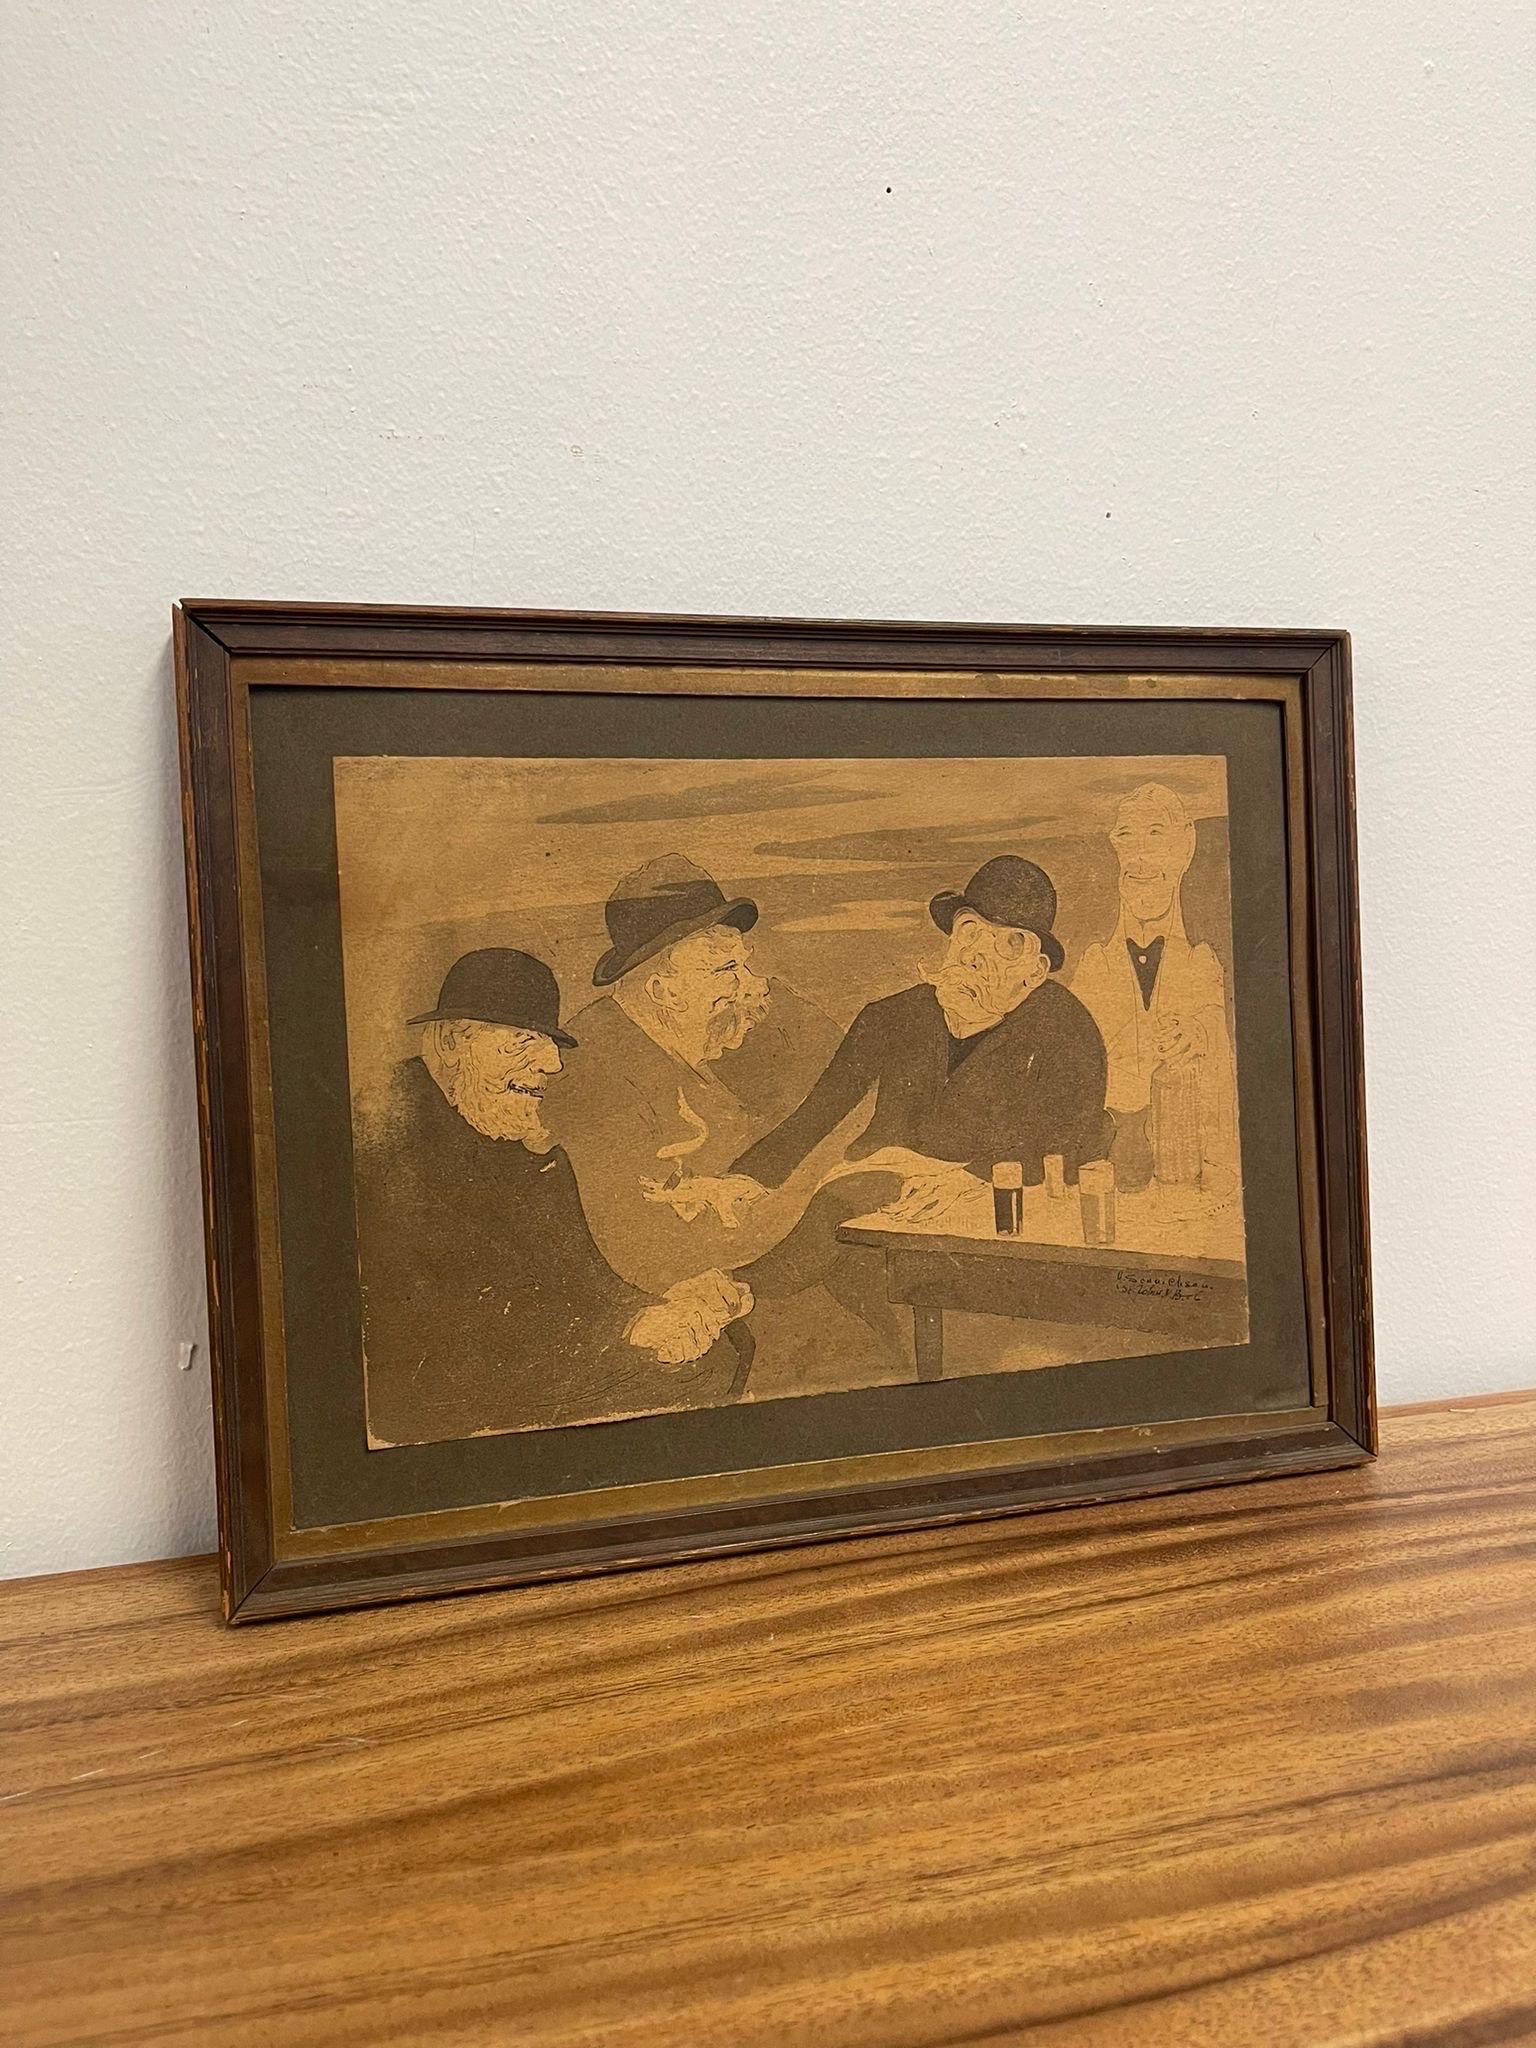 This Artwork has beautiful Petina on both the frame and Art due to aging. Possibly Watercolor or Pen on Paper. Vintage Condition Consistent with Age as Pictured.

Dimensions. 11 W ; 1/4 D ; 7 H